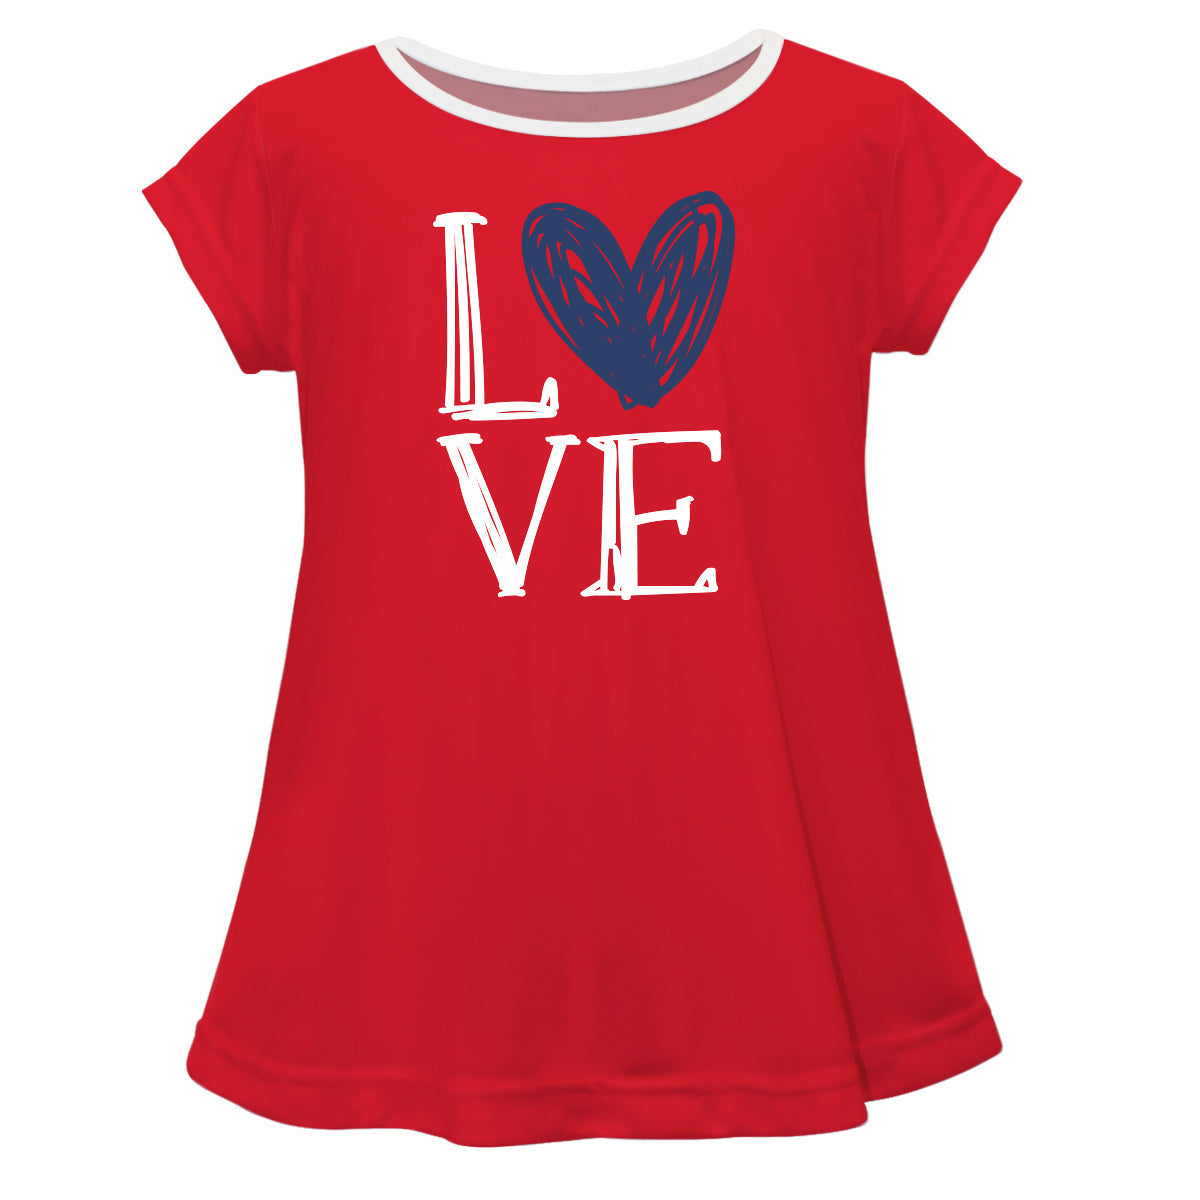 Love Heart Red Short Sleeve Laurie Top